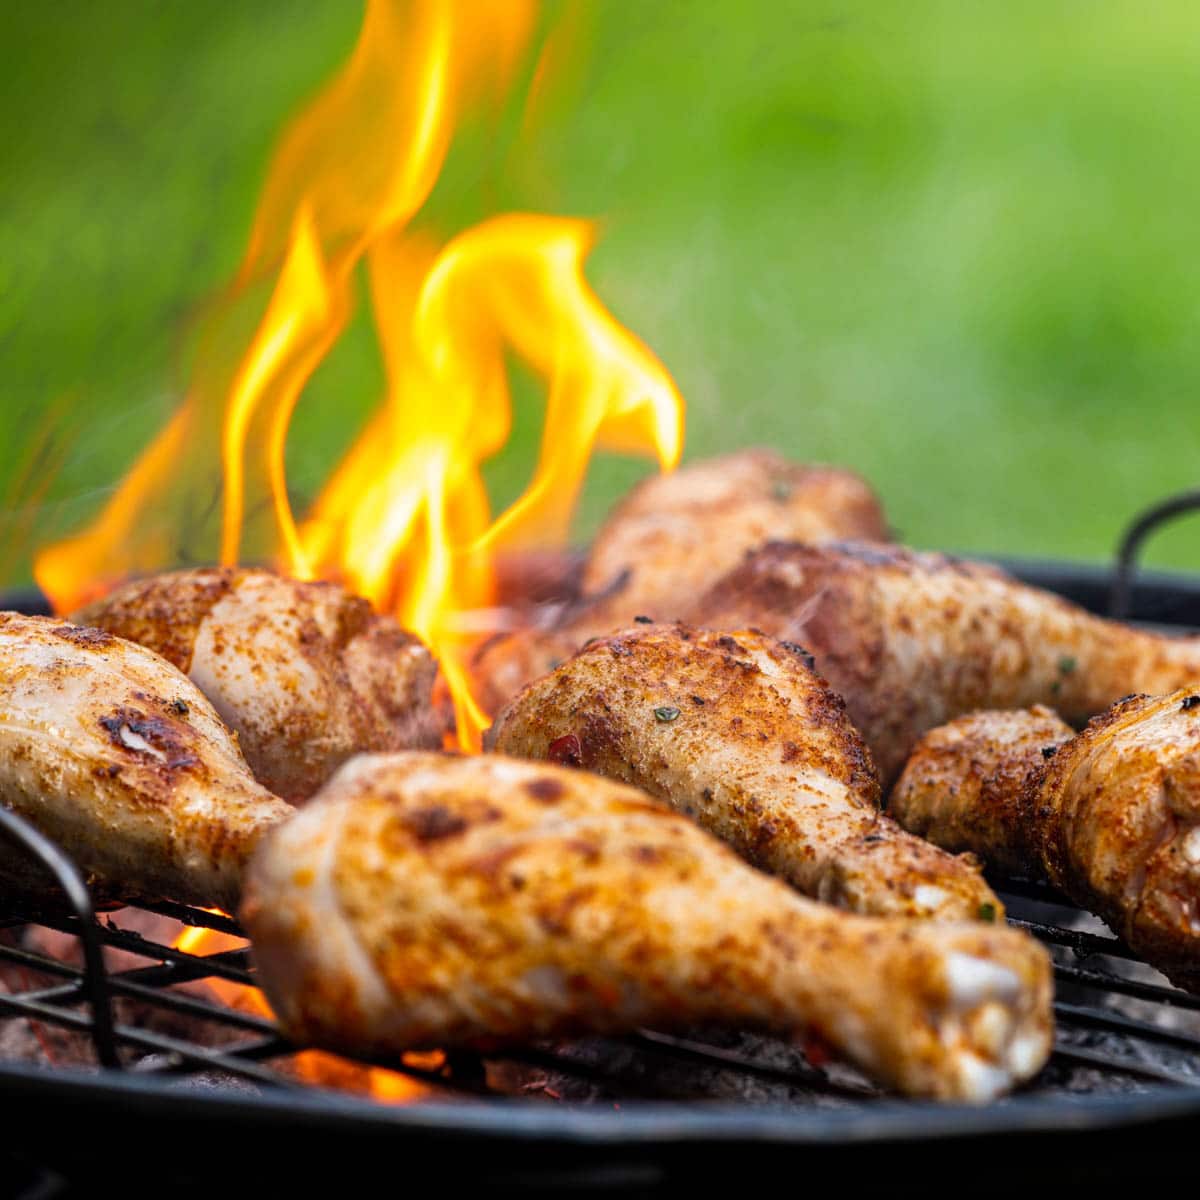 Chicken drumsticks on a charcoal grill with flames.